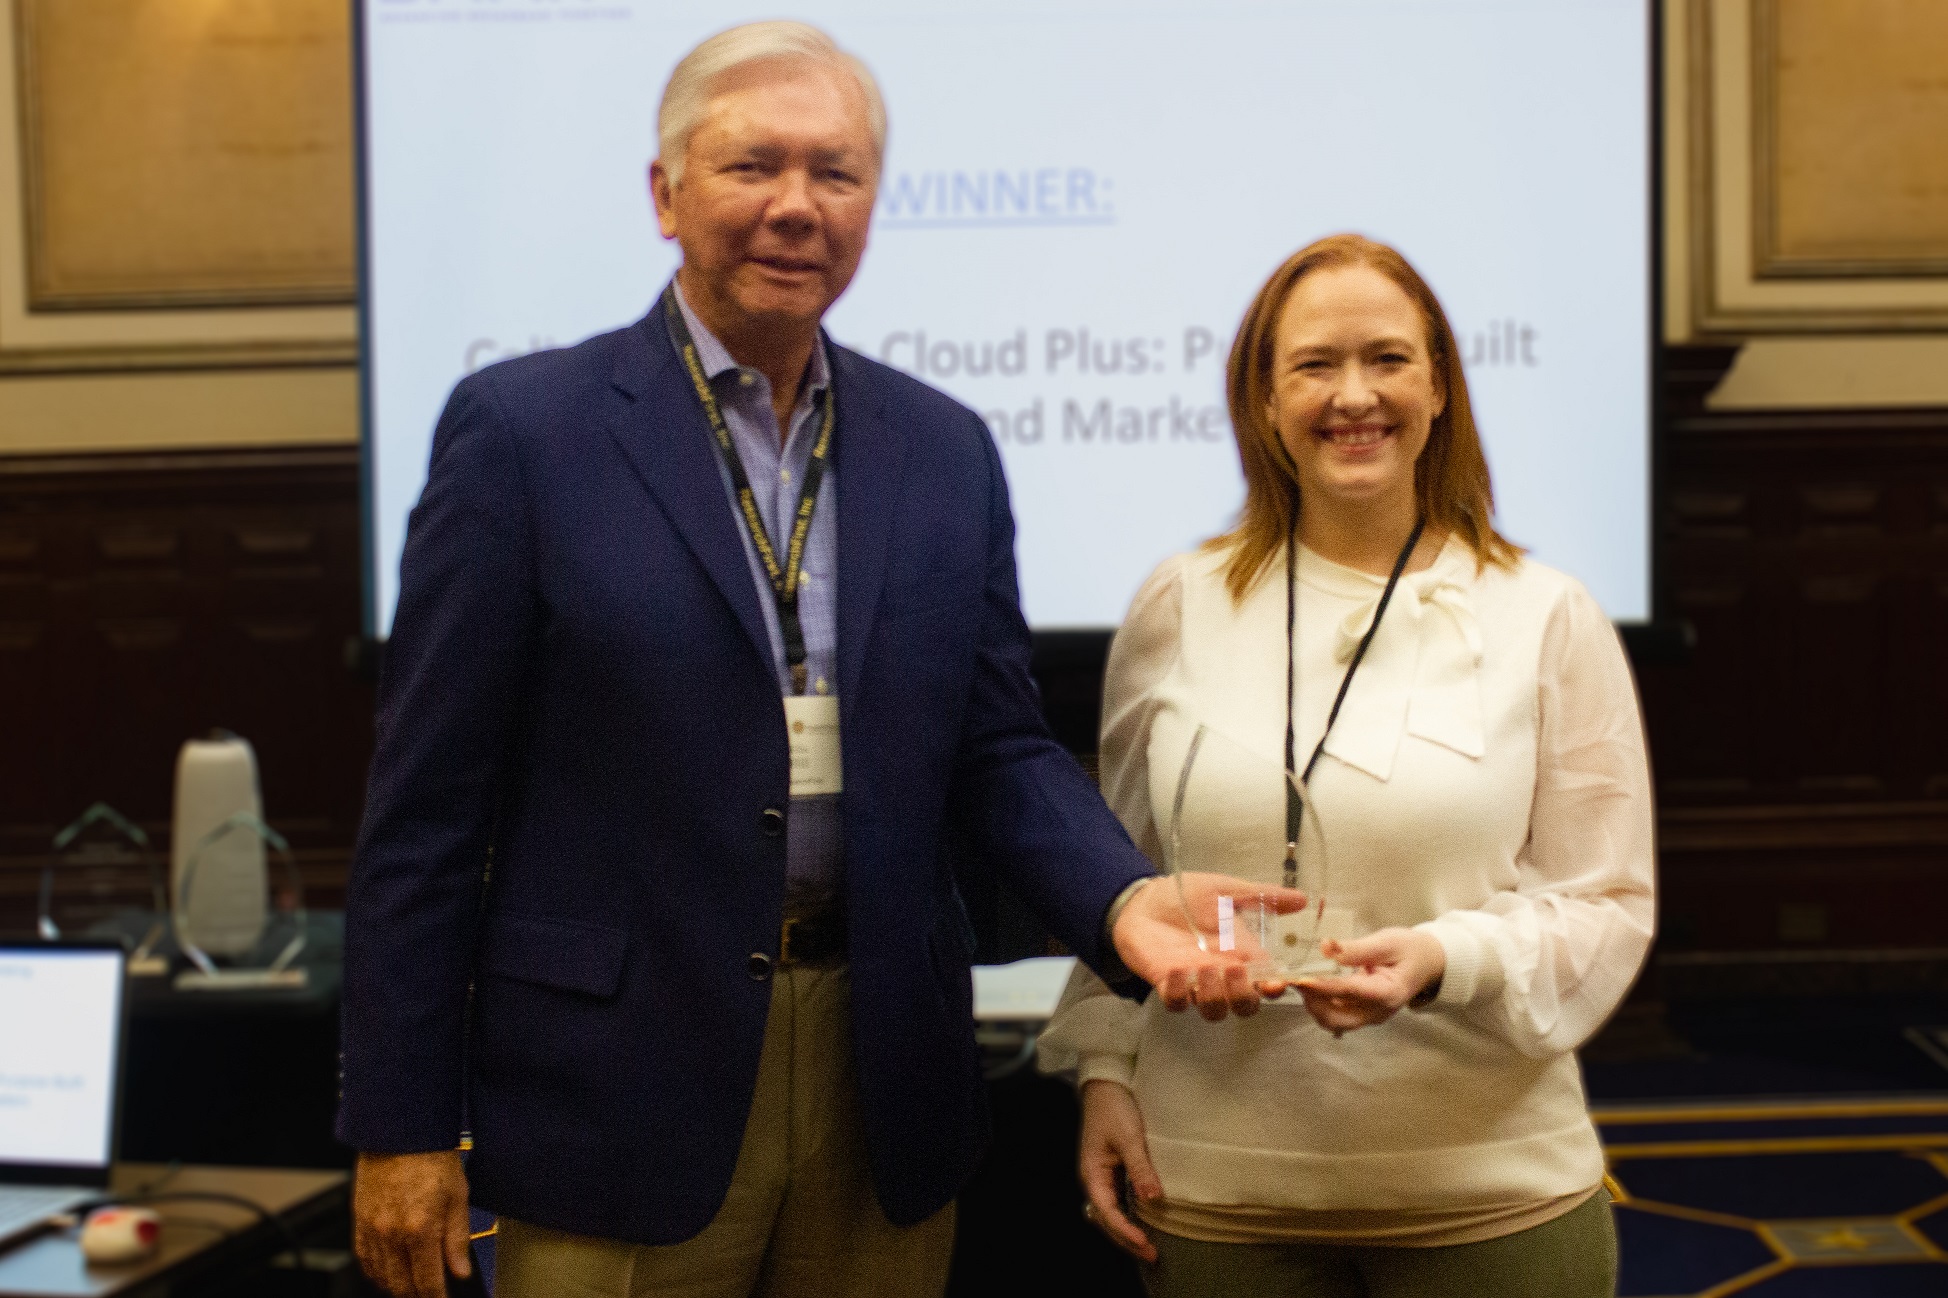 Chelsi Runyan, Senior Business Insights Services Manager at Calix (right) accepts the Vendor Marketing Award from Ellis Hill, President of ResearchFirst (left).